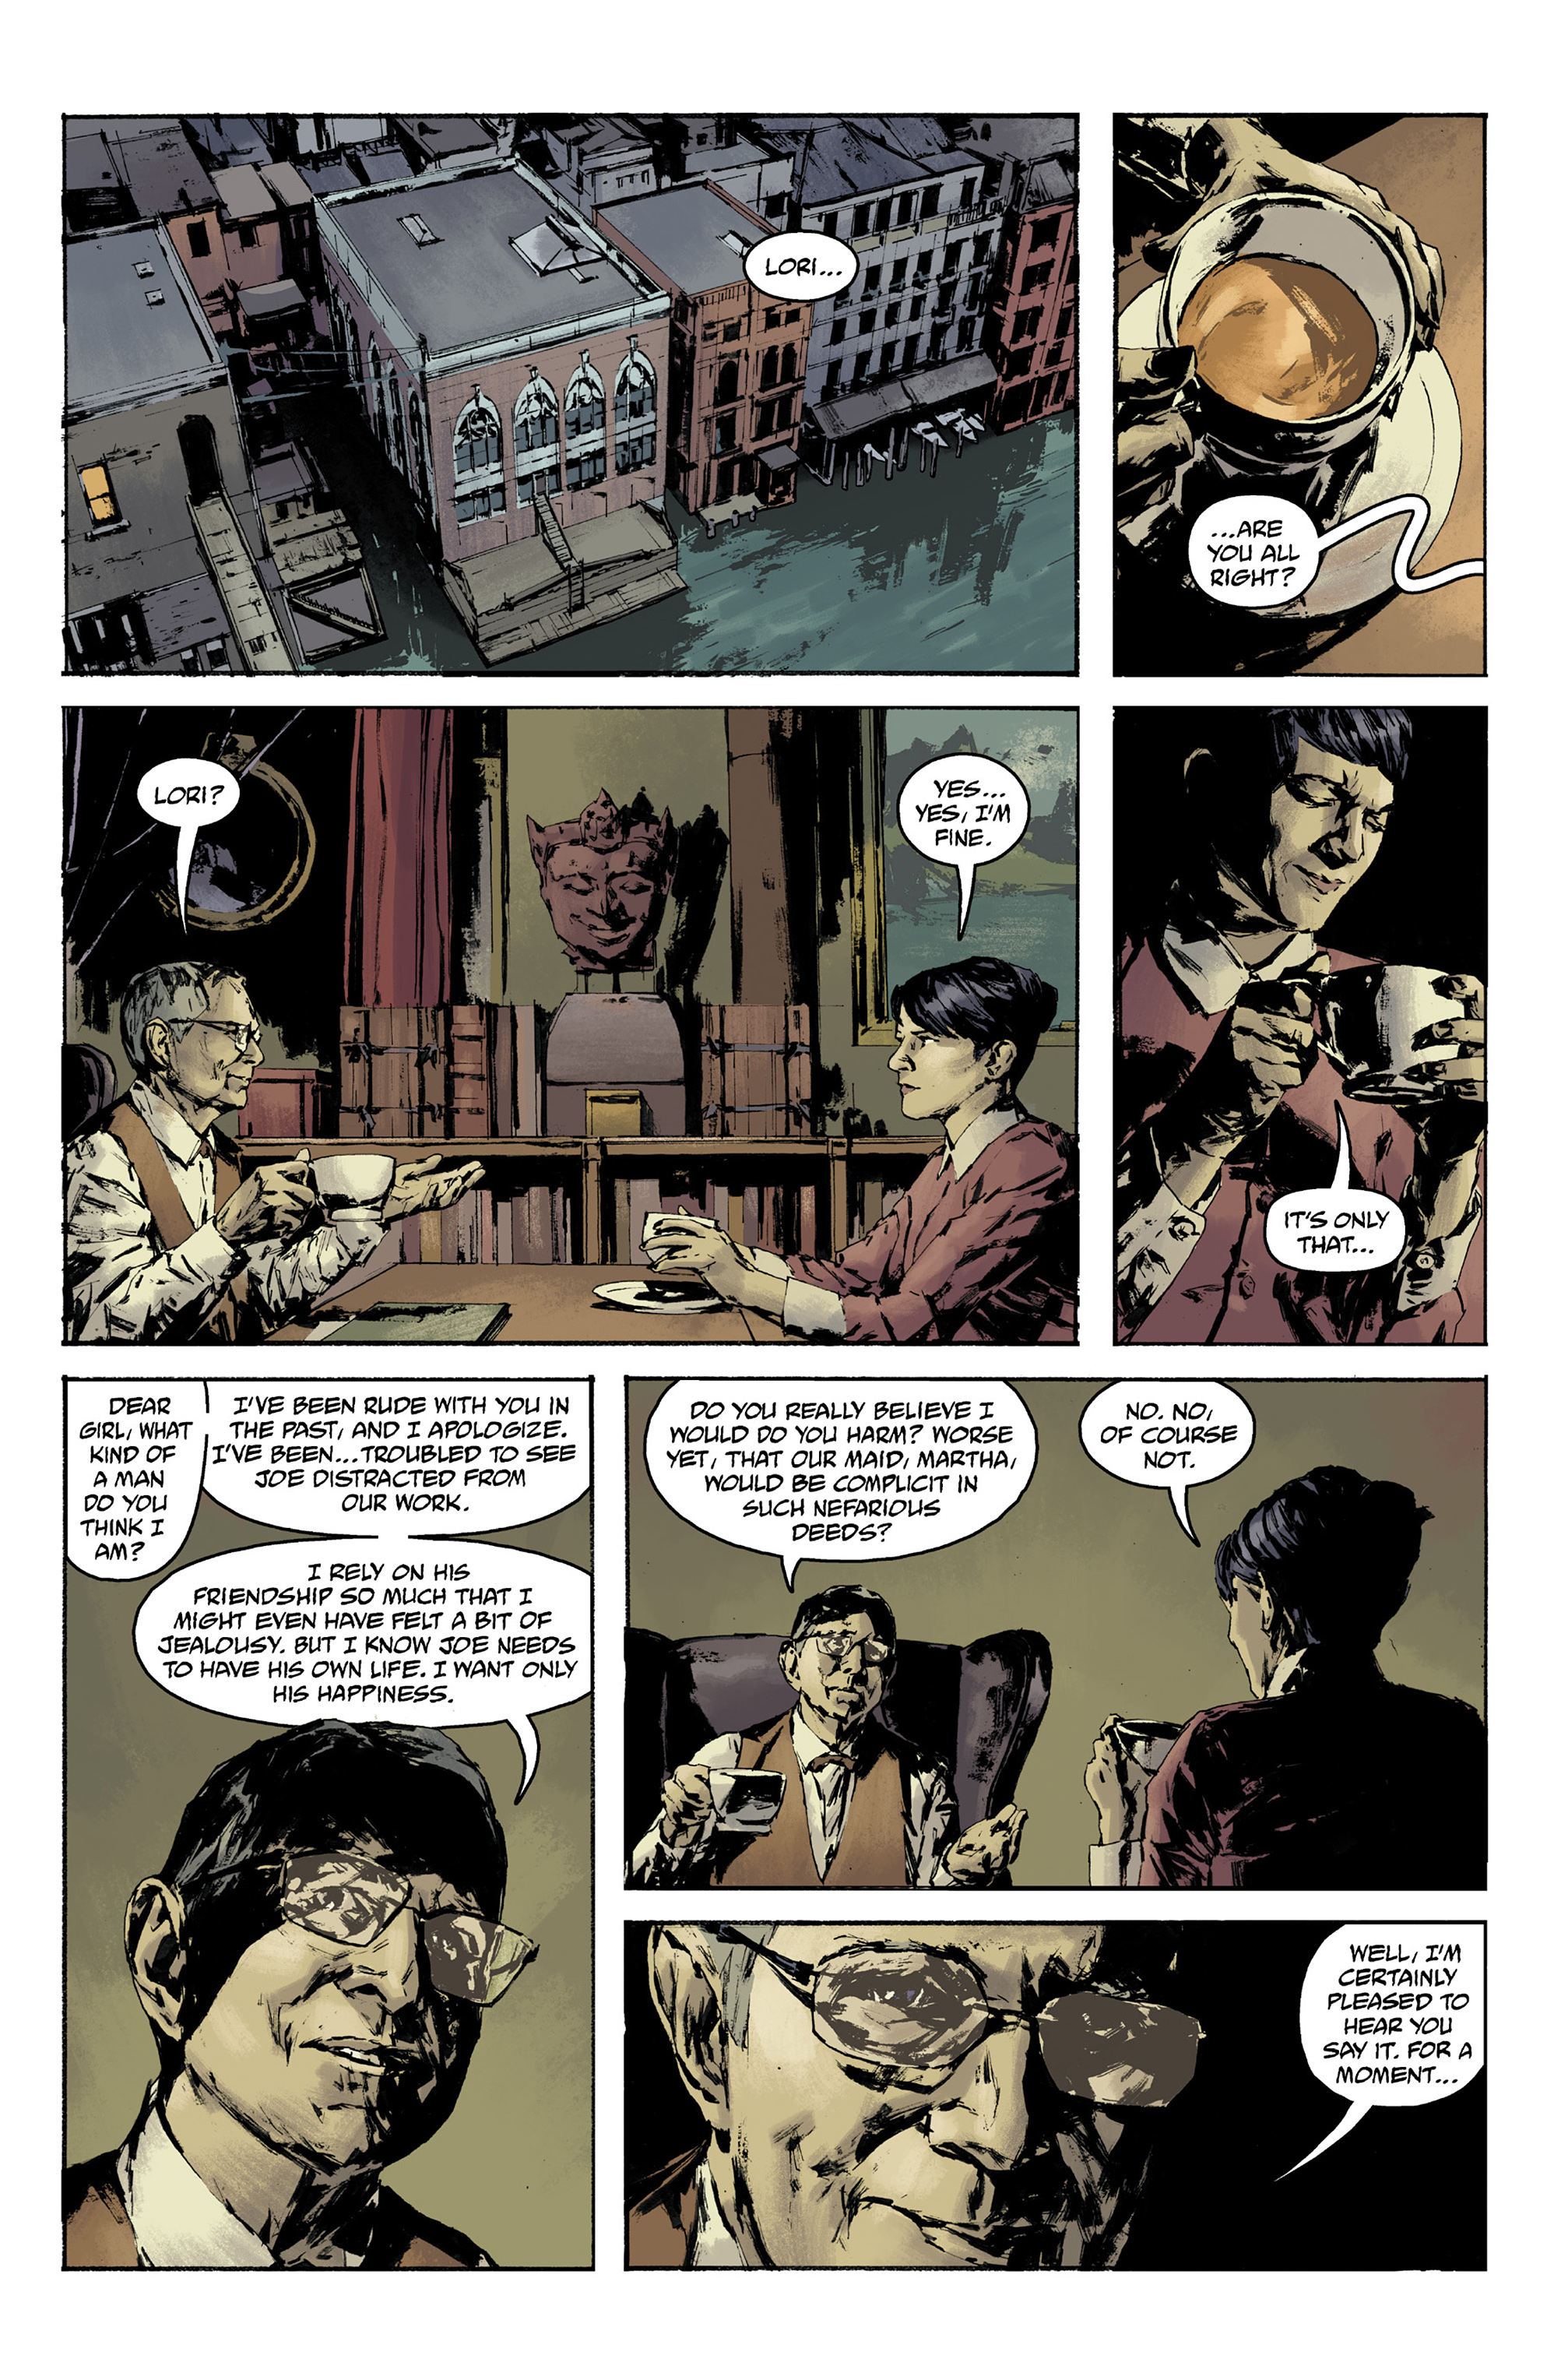 Joe Golem: Occult Detective - The Outer Dark: Chapter 3 - Page 3